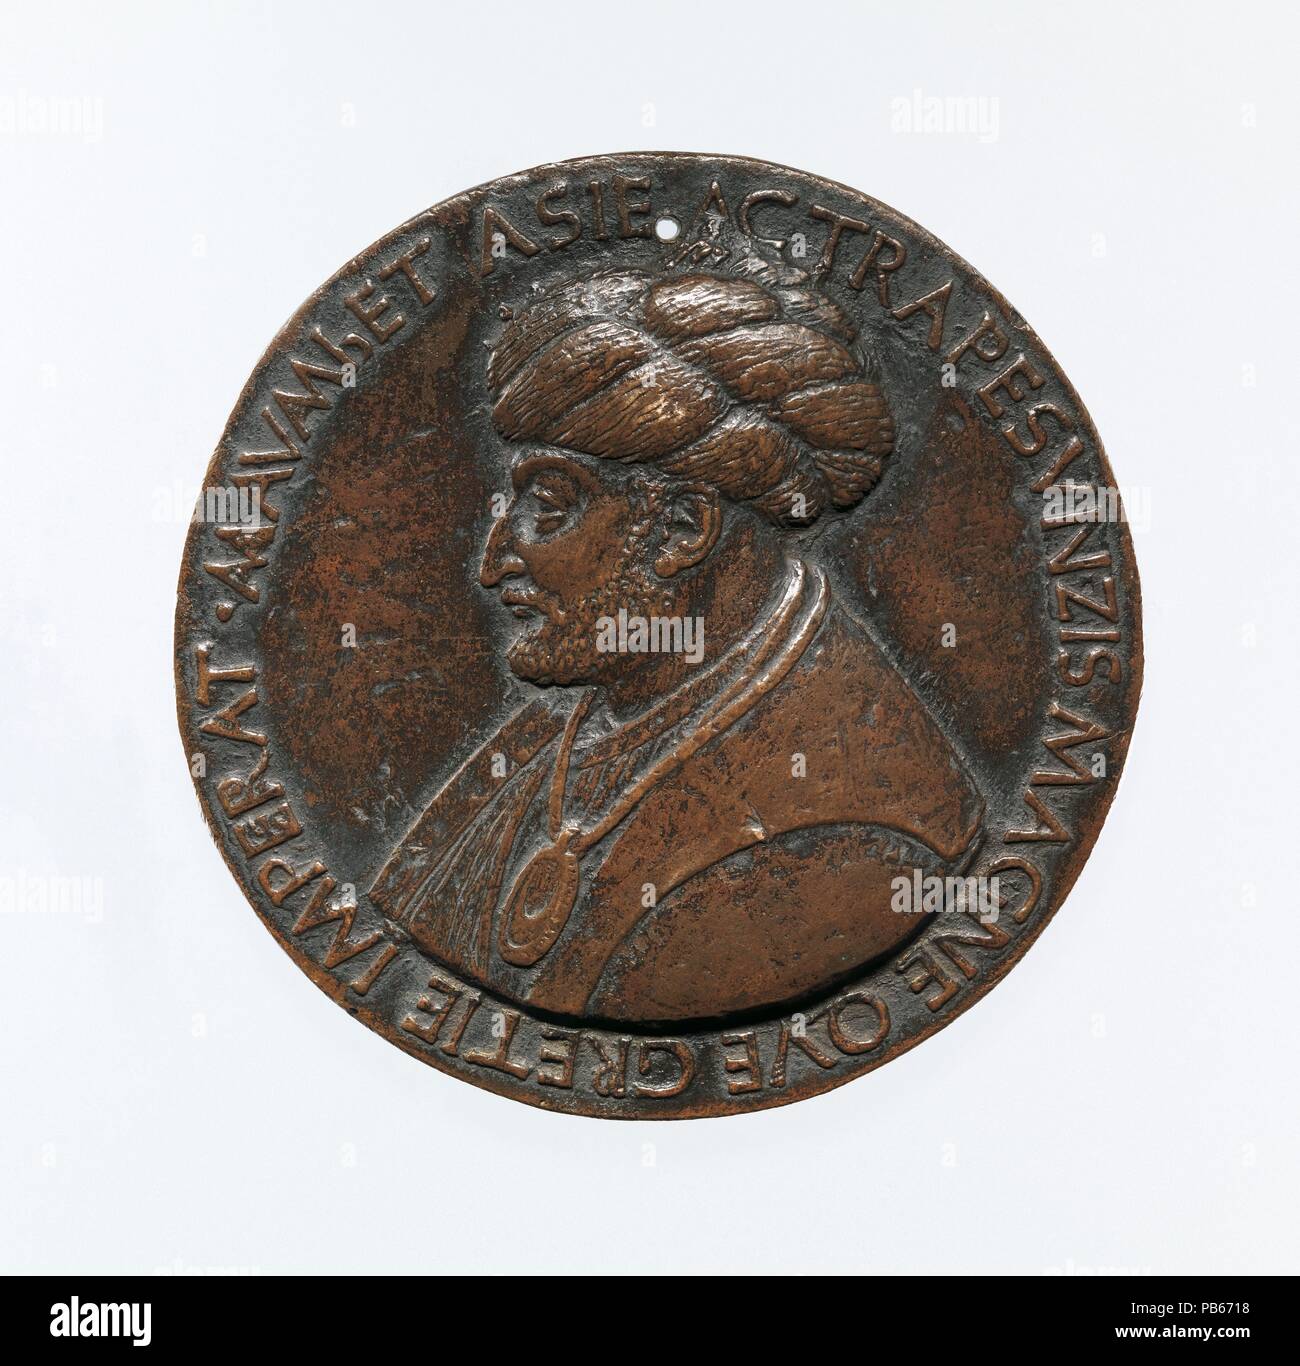 Portrait medal of Sultan Mehmed II (obverse); a Triumphal Chariot (reverse). Artist: Bertoldo di Giovanni (Italian, born Florence (?) ca. 1430-40, died 1491 Poggio a Caiano). Dimensions: Diam. 9.4 cm, wt. 321.66 g.. Date: model 1480 (old aftercast).  Bertoldo based this likeness on a medal by the Venetian artist Gentile Bellini, who had also painted the Ottoman sultan's portrait. Mehmed favored Italian medalists, perceiving their art form as a way to emphasize his rightful lineage among the emperors of Byzantium and ancient Rome. This medal, Bertoldo's largest and only signed example, was a gi Stock Photo